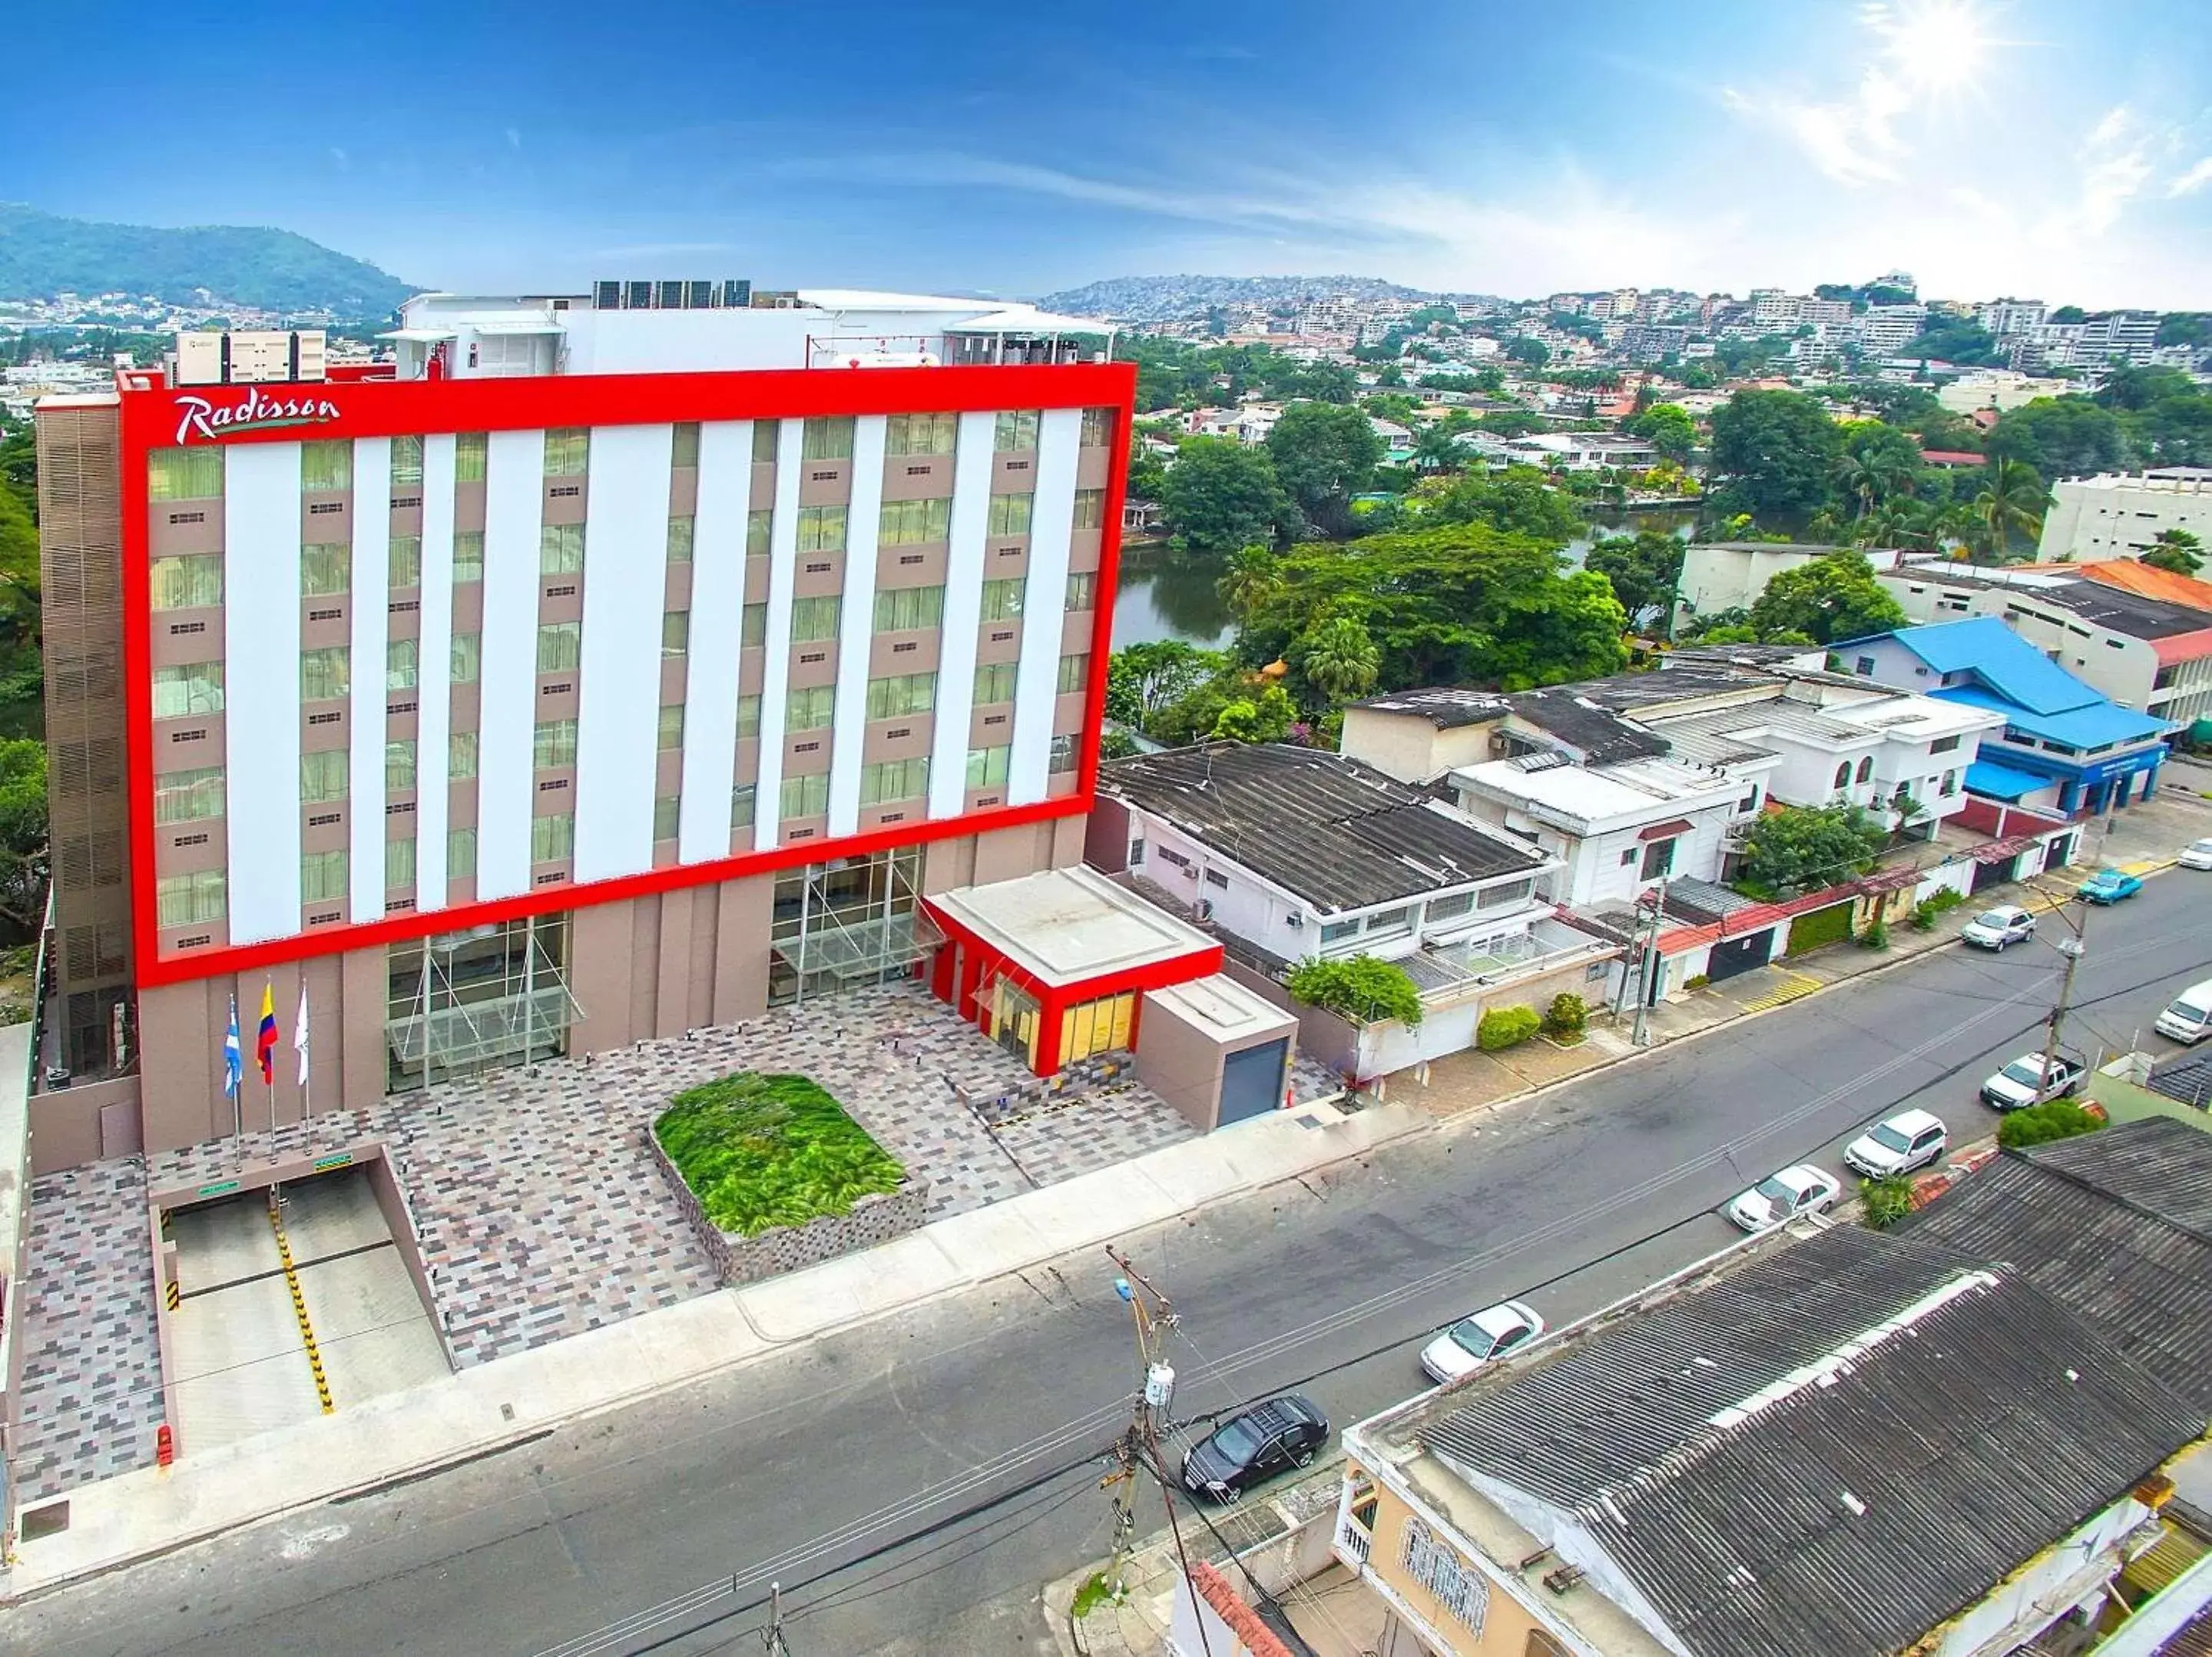 Property building in Radisson Hotel Guayaquil